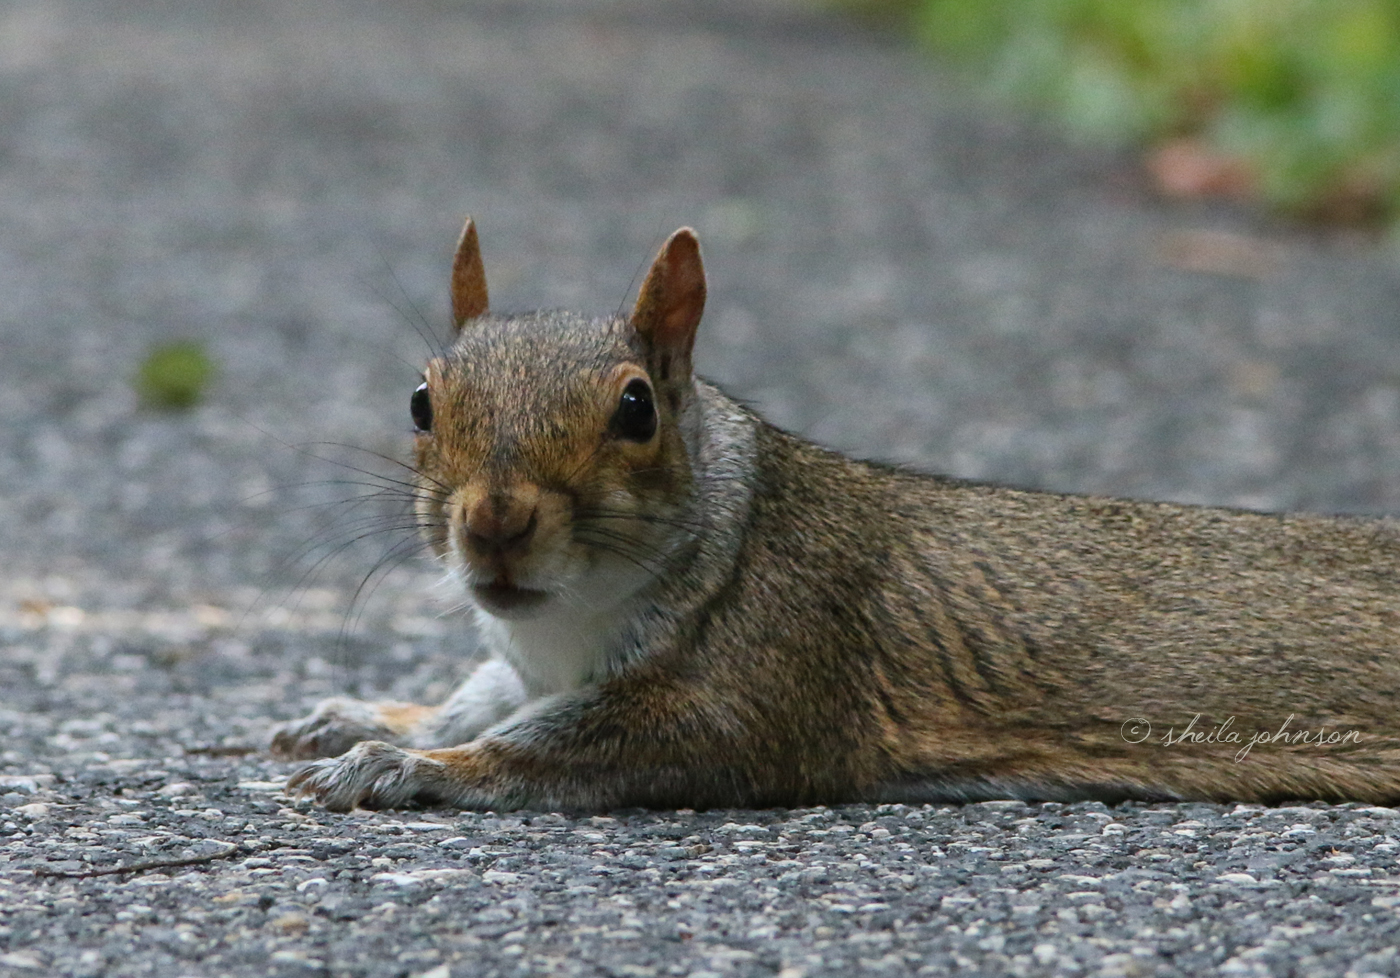 Sprawling On Shaded Asphalt Hits The Spot In The Heat Of A Maryland Summer. This Gray Squirrel Takes Advantage Of A Low-Traffic Area For Just That Purpose.